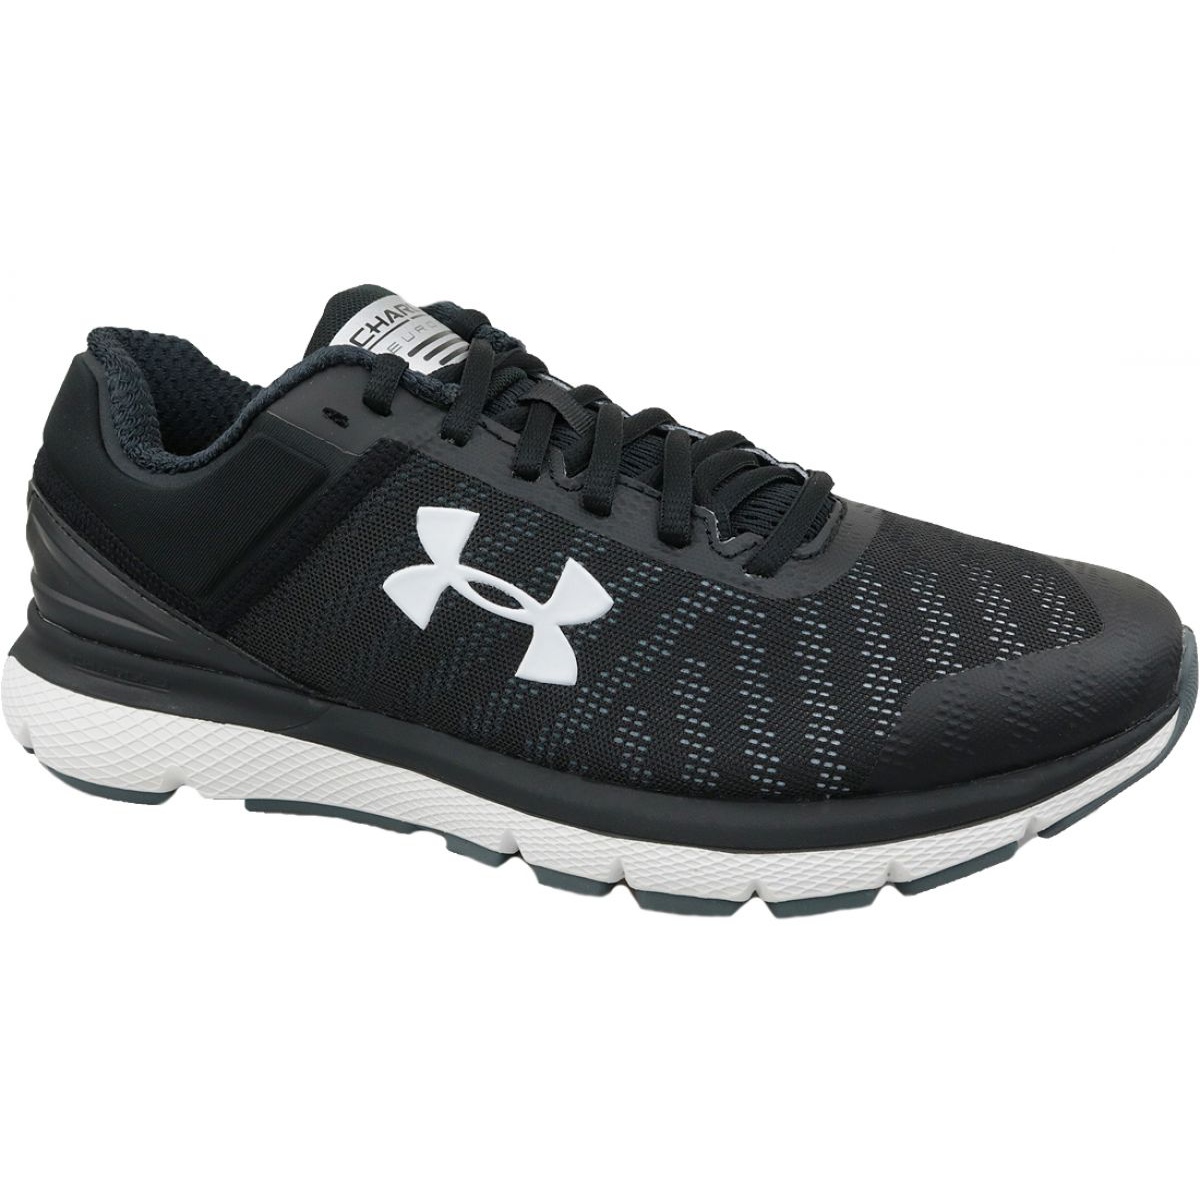 Under Armour Under Armor Charged 2 M 3021253-003 running shoes black - KeeShoes